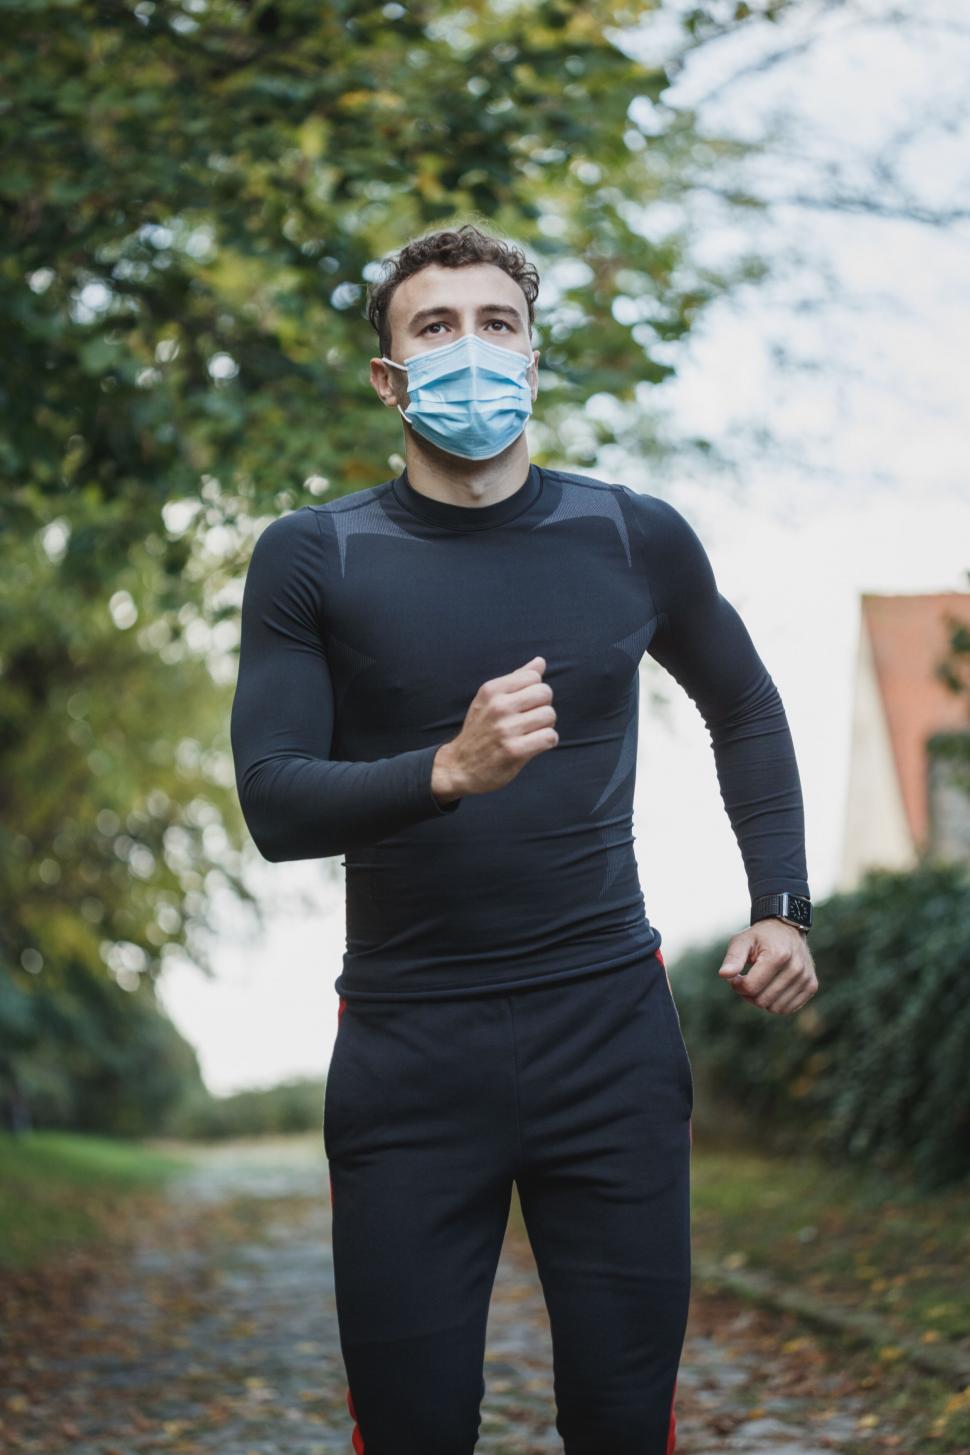 Free Image of Runner wearing a mask on a path 